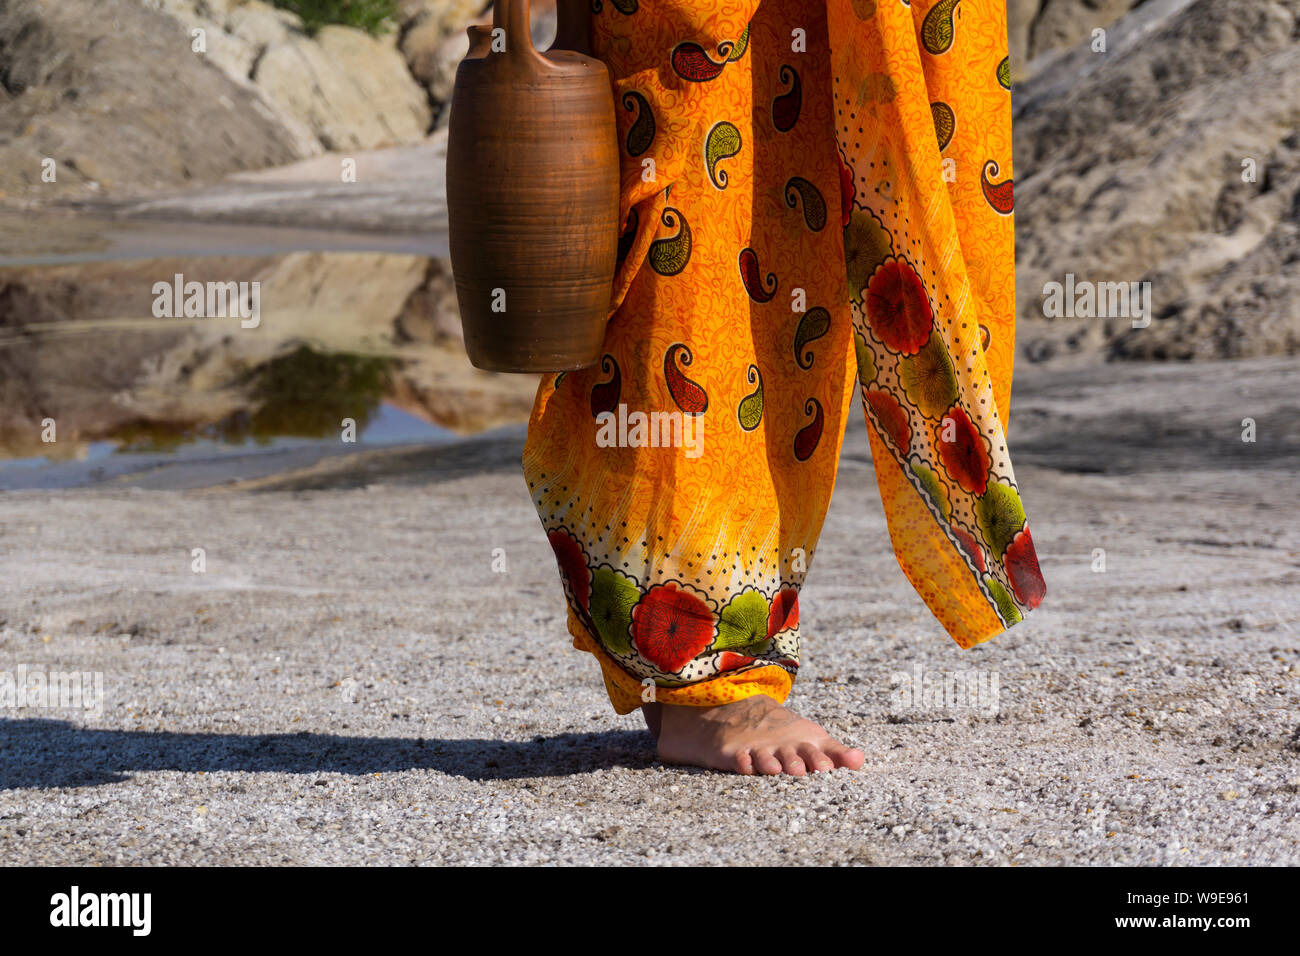 a woman in ethnic dress walking for water with ceramic jug in desert landscape Stock Photo